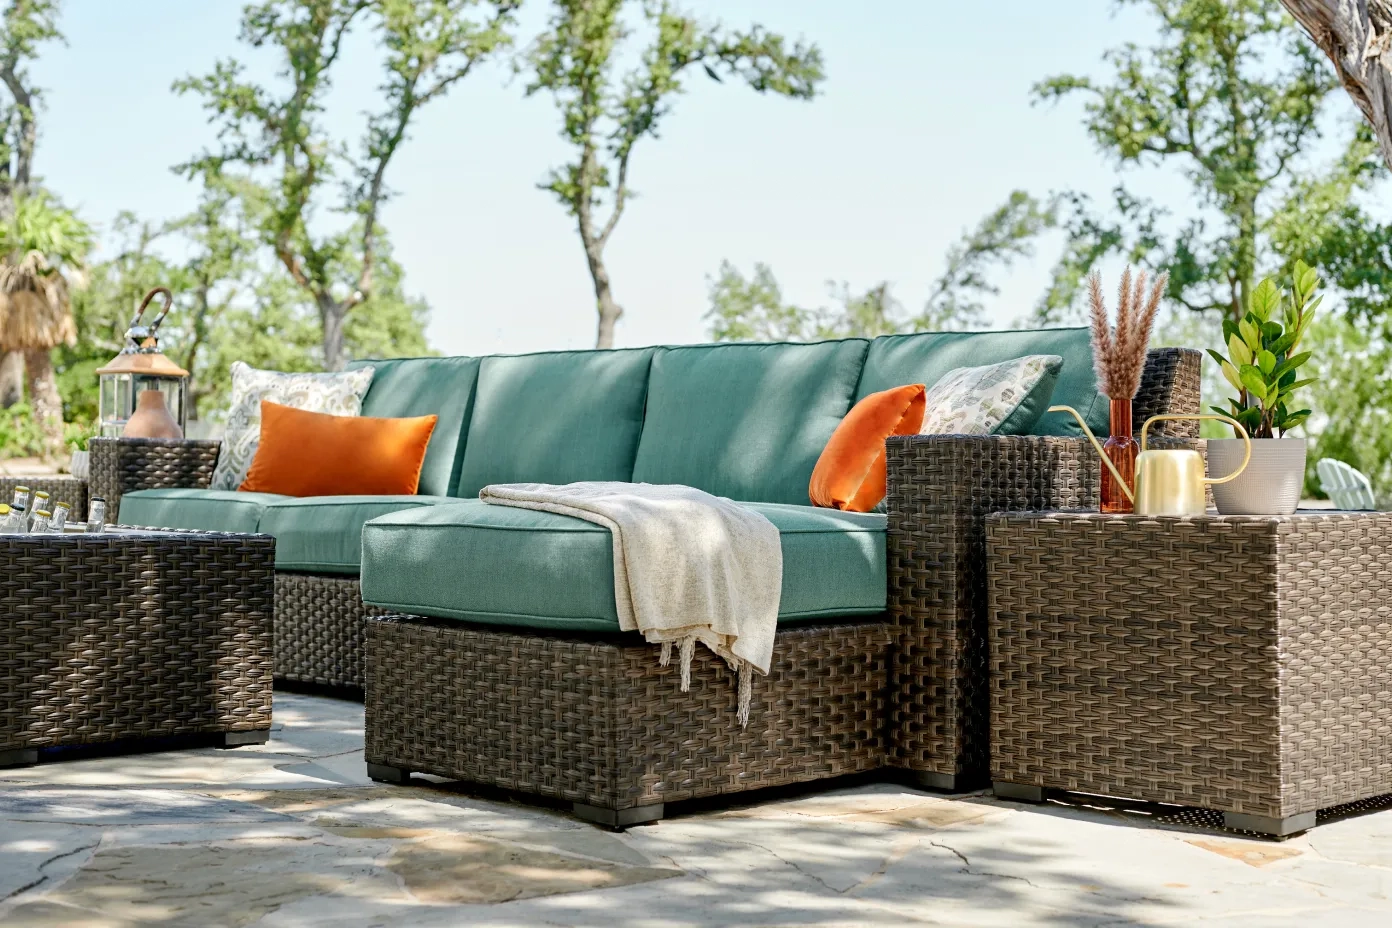 Outdoor wicker sofa with green cushions, orange pillows, and cozy throw blanket